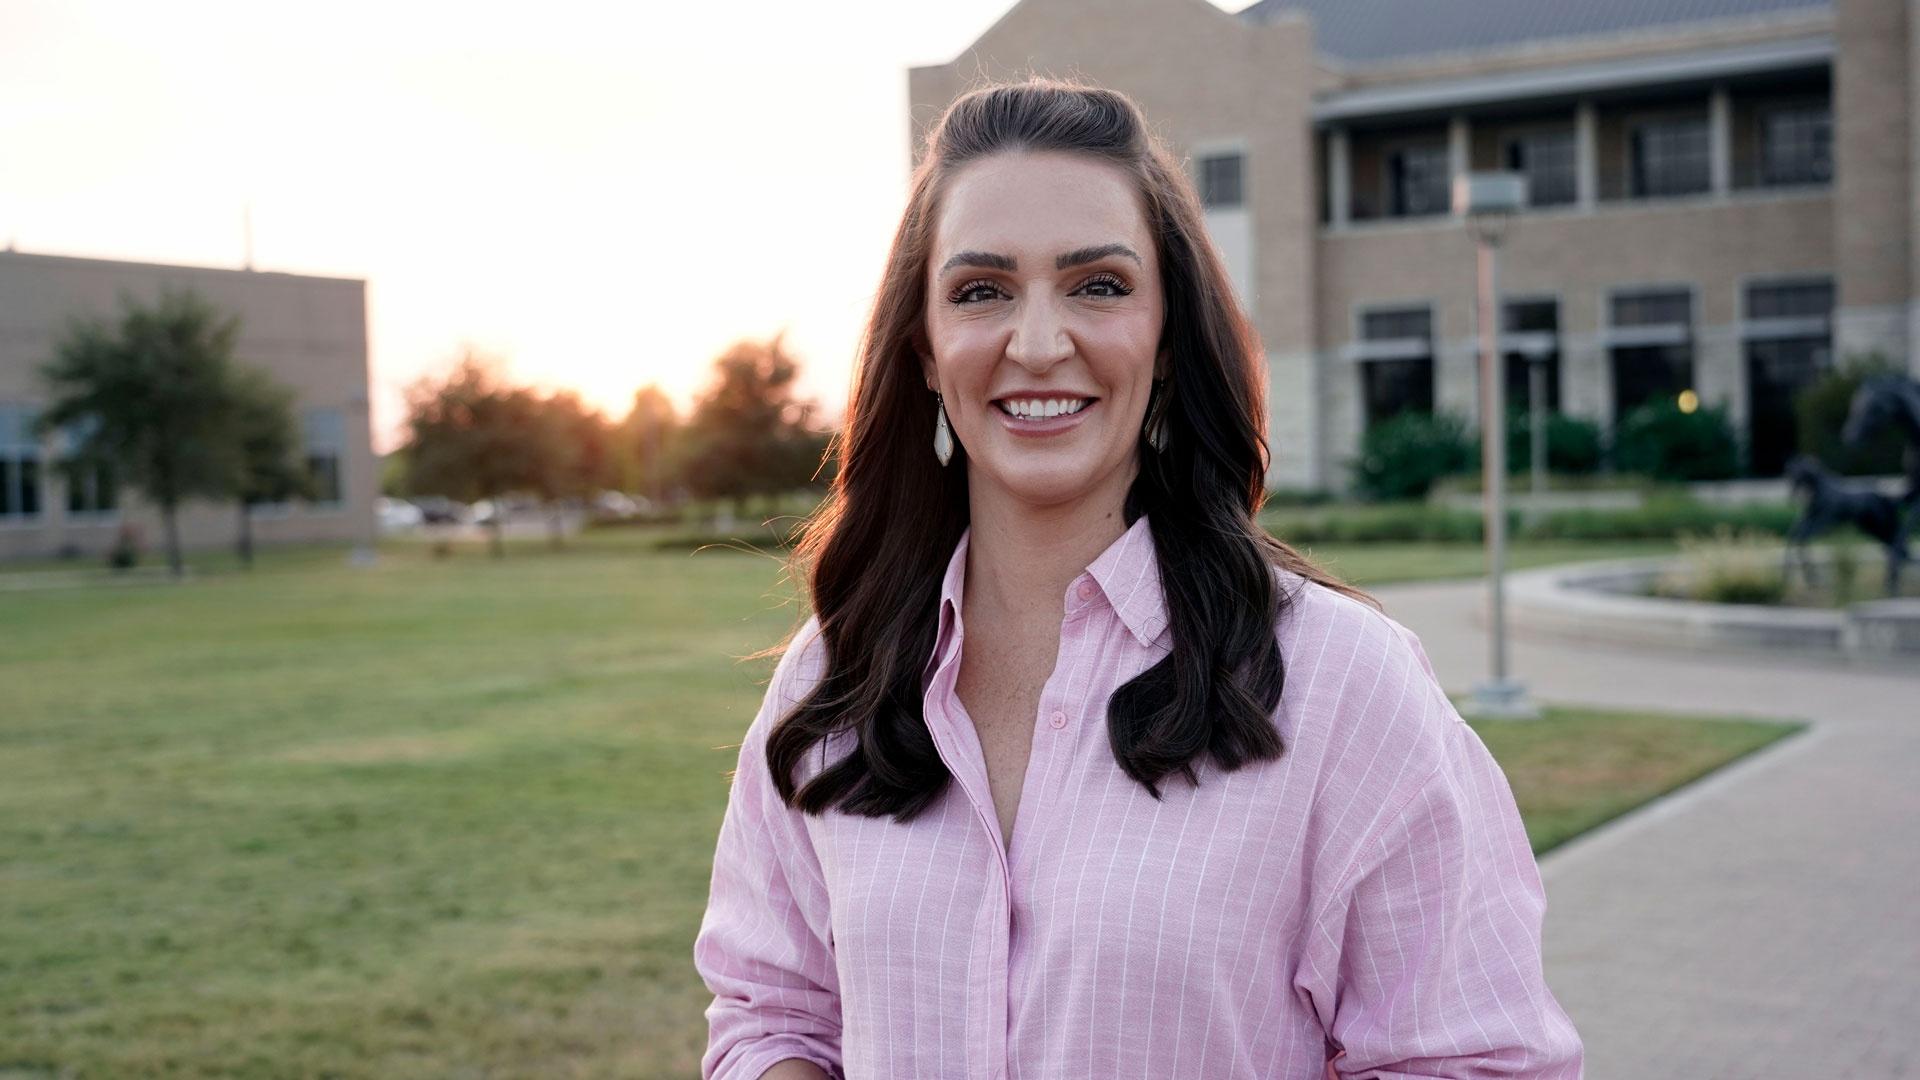 Chelsea Reber, host of "Texas A&M Today."